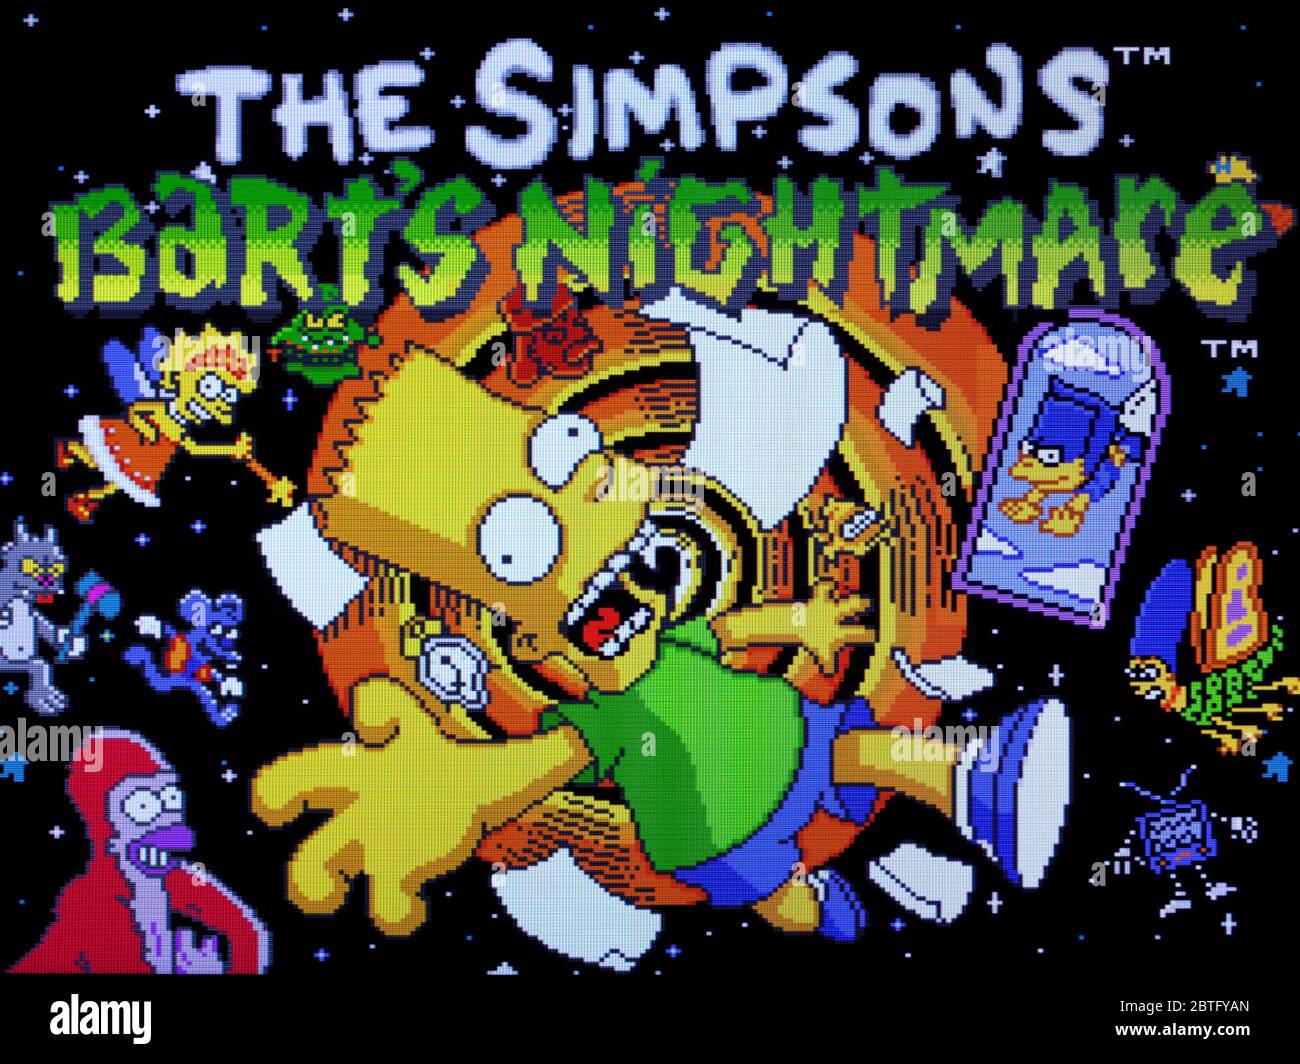 The Simpsons Bart's Nightmare - SNES Super Nintendo - Editorial use only  Stock Photo - Alamy